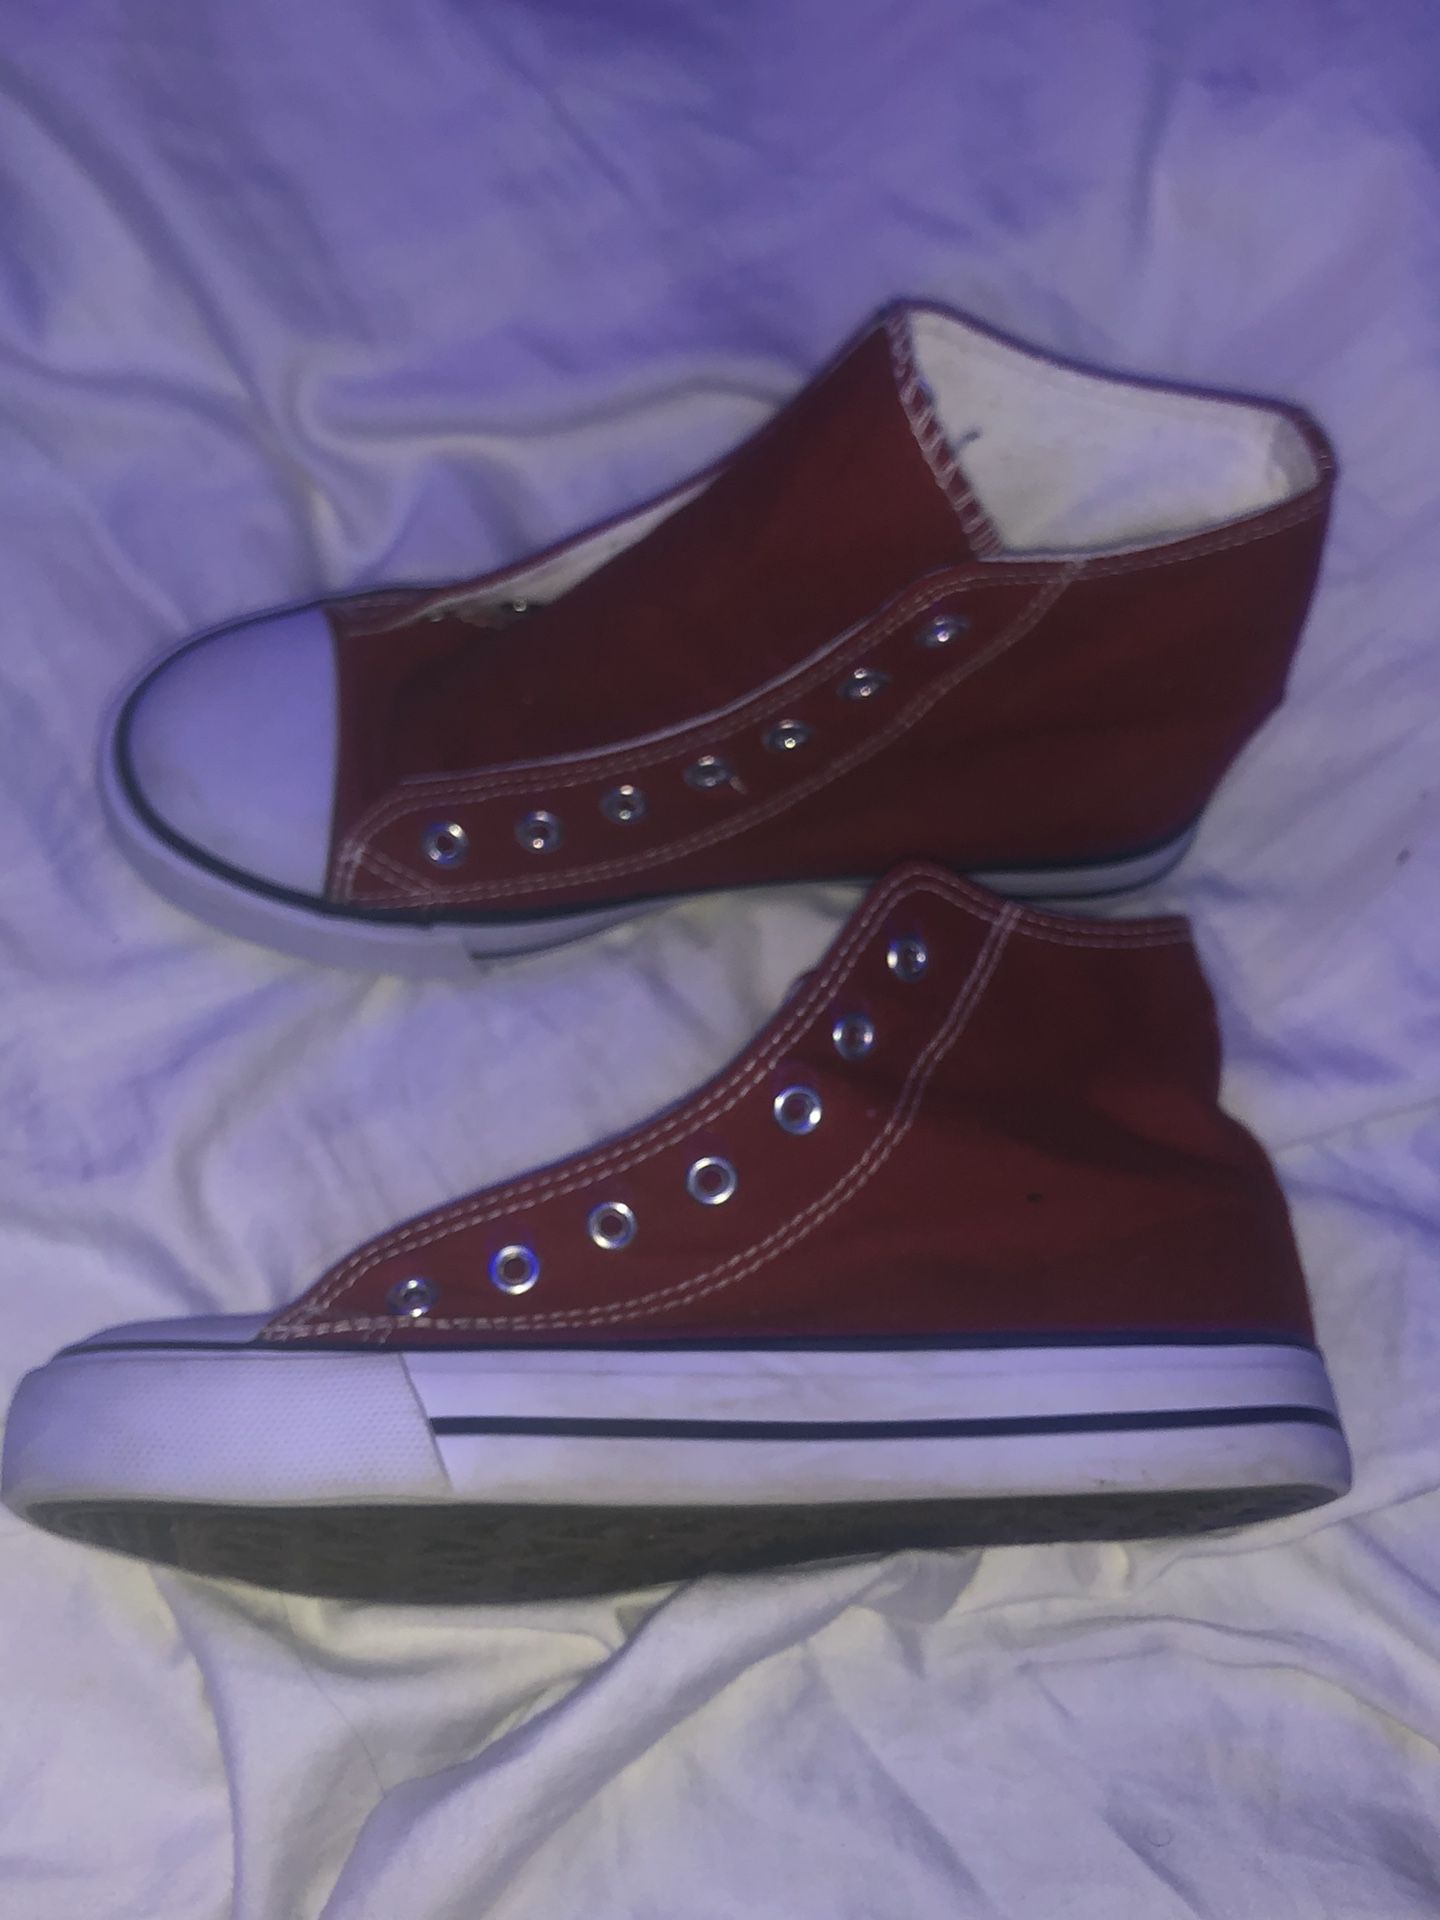 red converse dupes